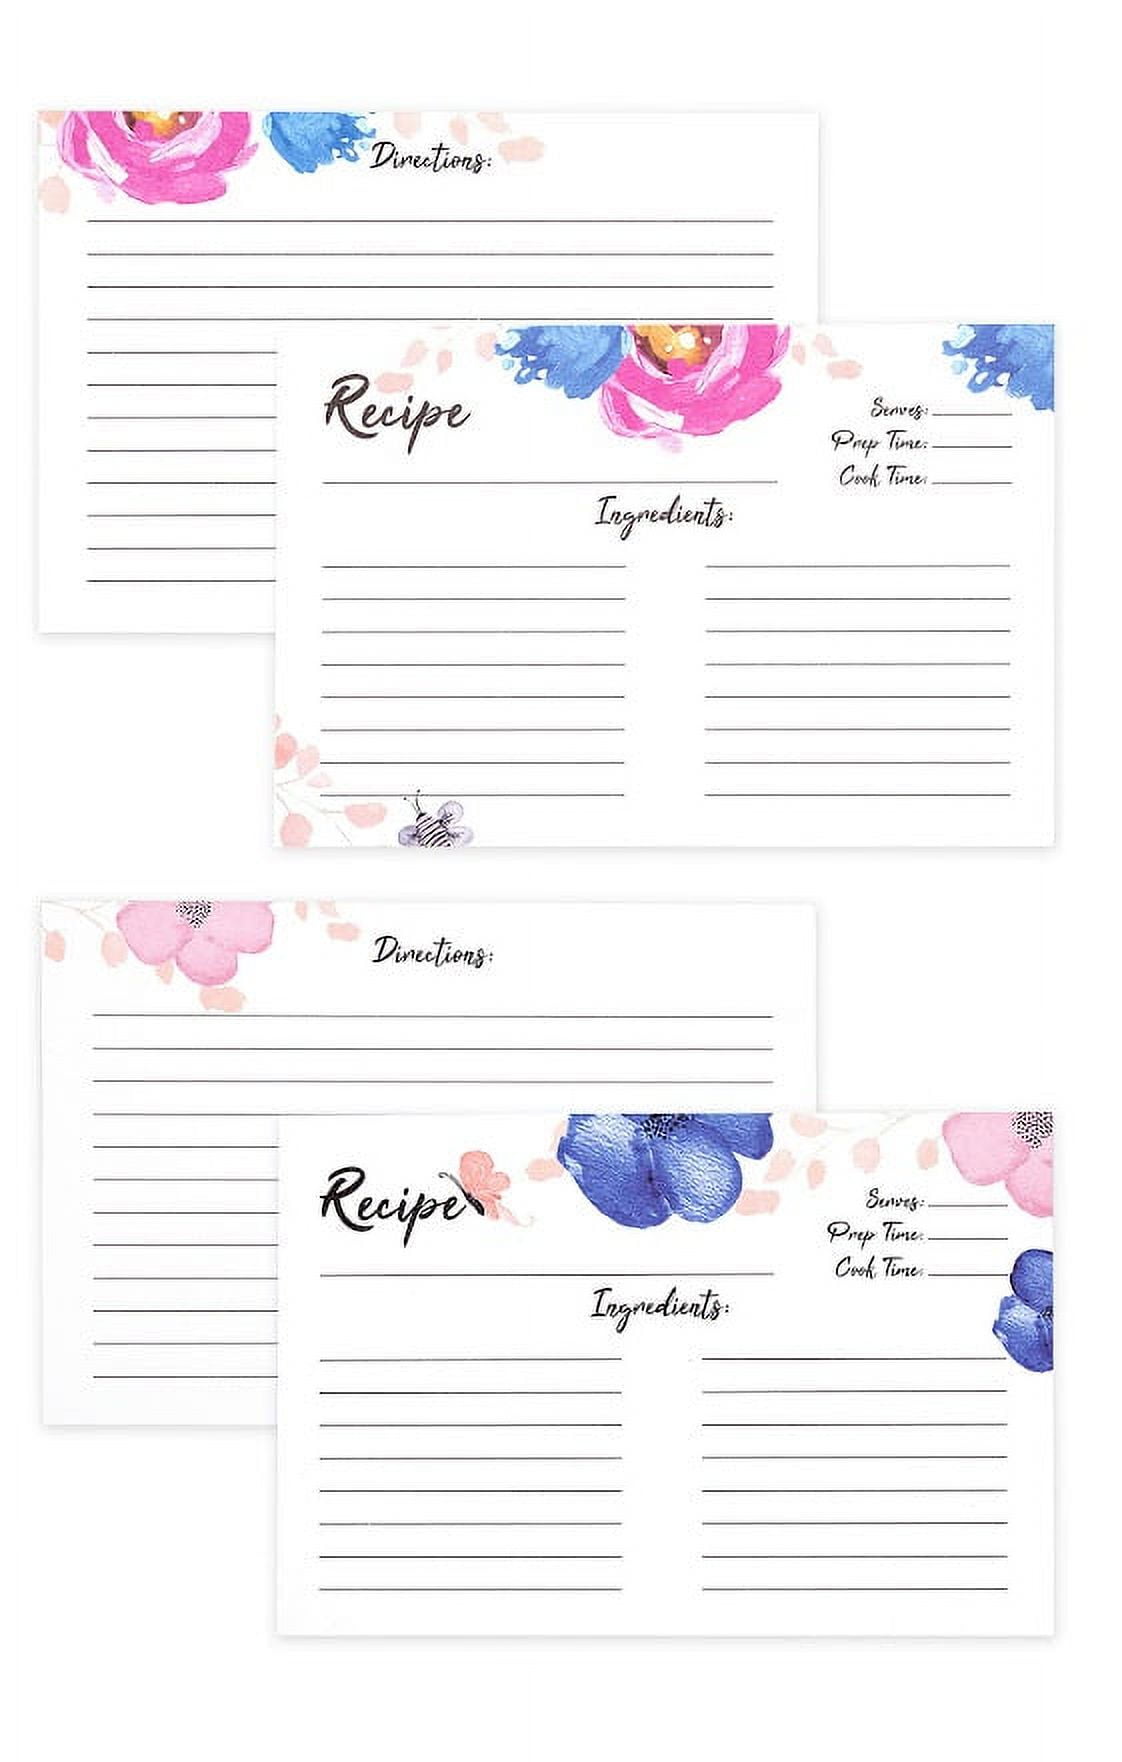 Tuyere Recipe cards 4x6 Inches Double Sided（50 Count) With 24